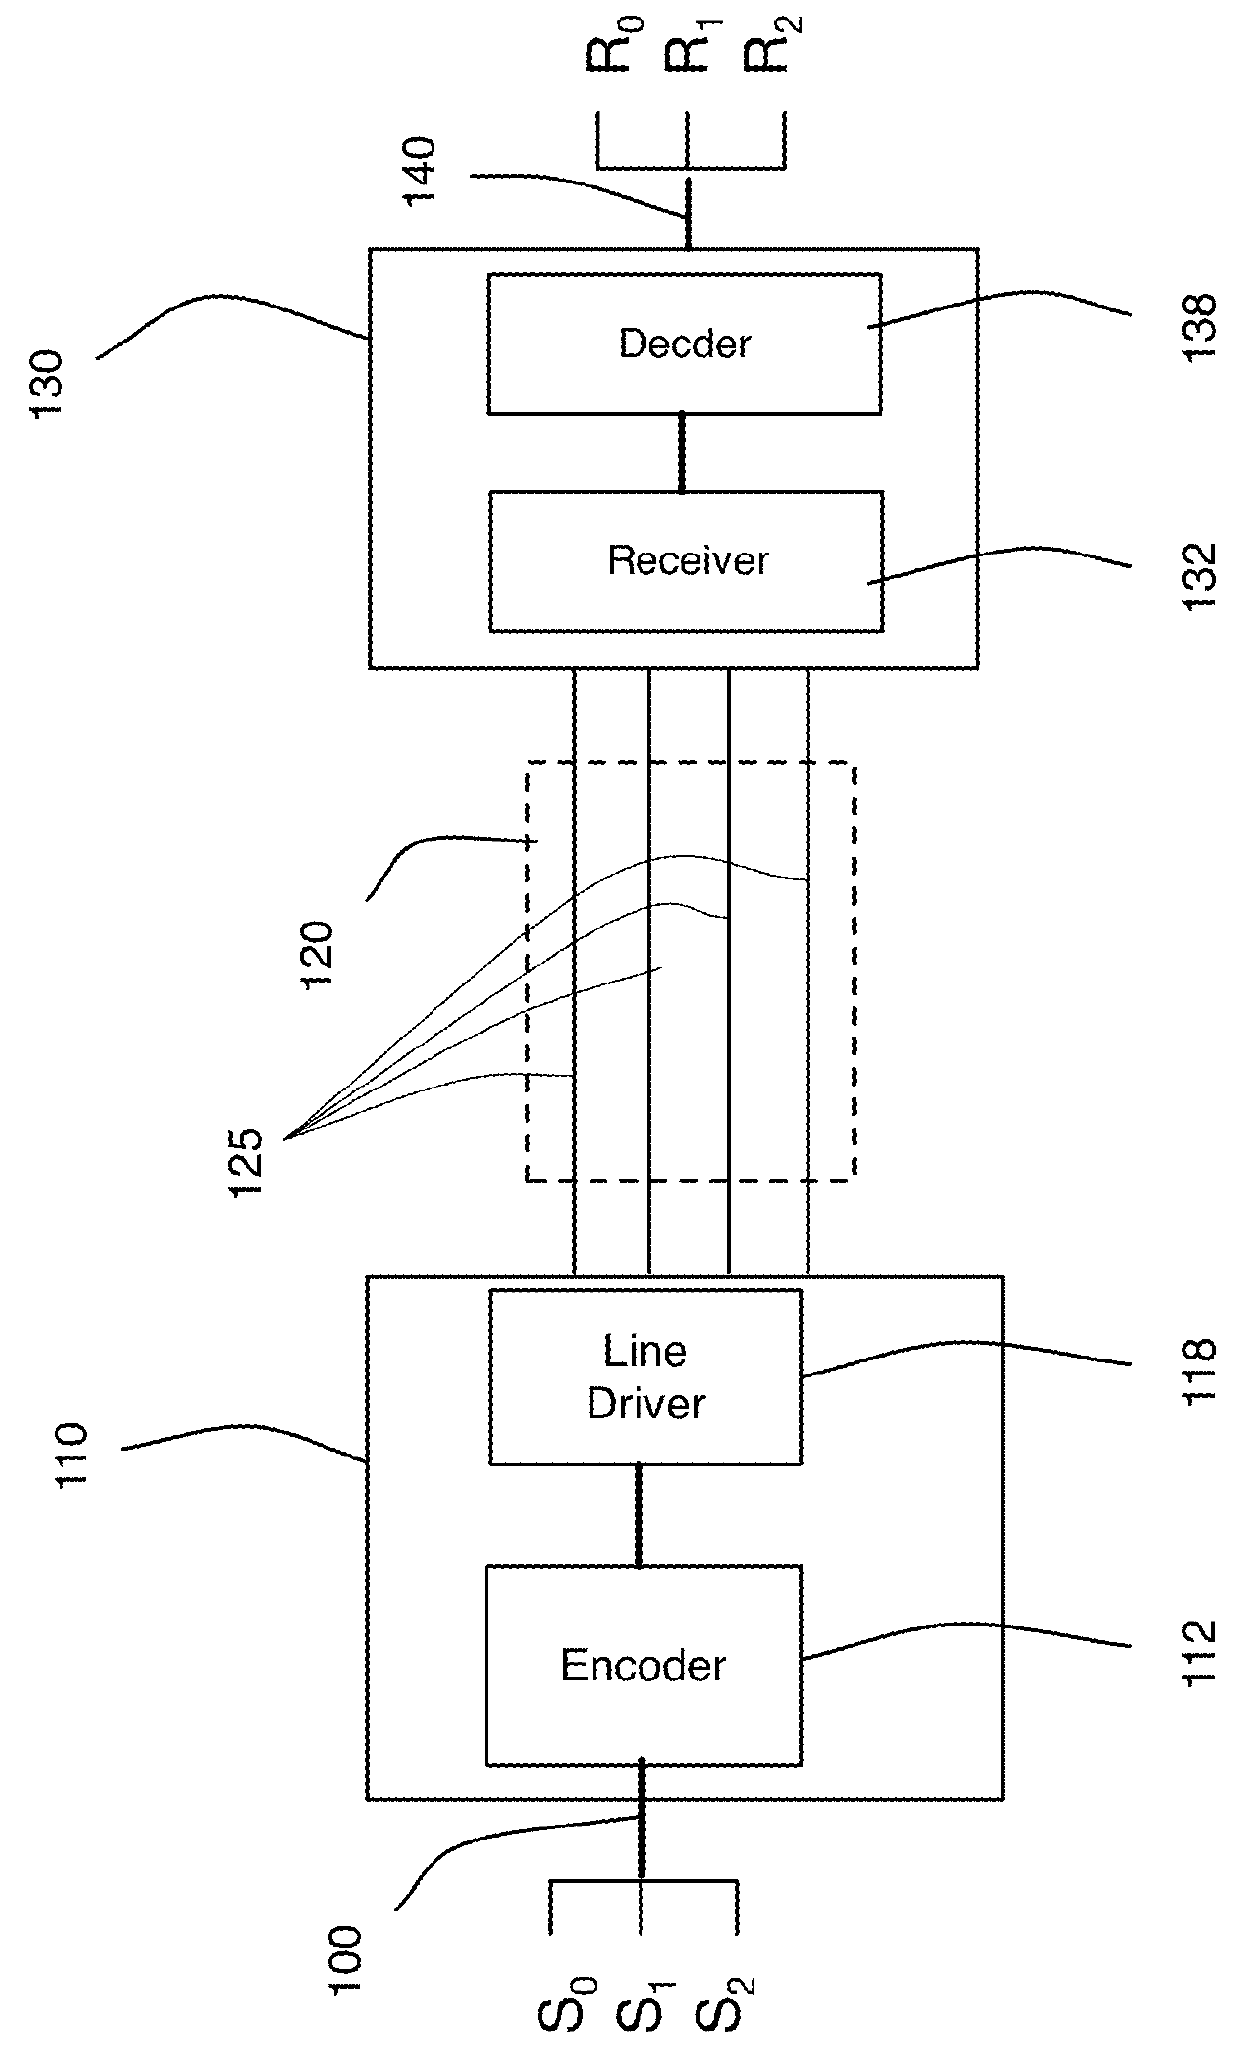 Orthogonal Differential Vector Signaling Codes with Embedded Clock